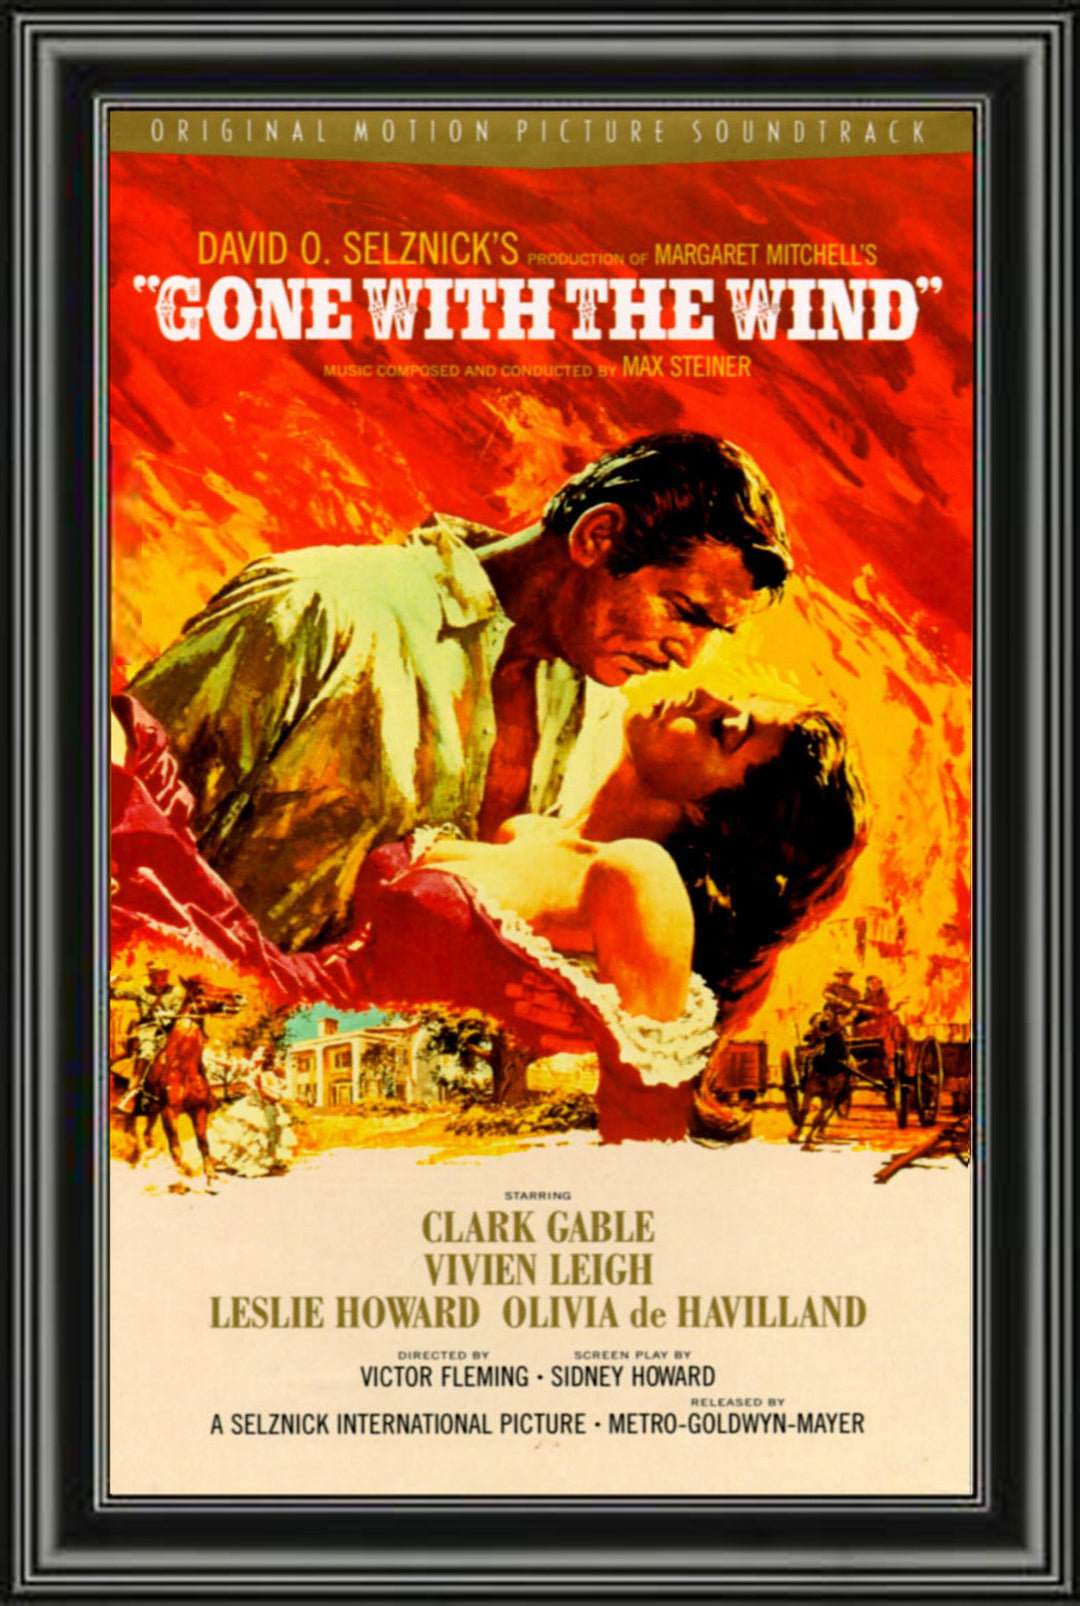 Gone With The Wind - Framed Classic Movie Poster Reprint, Contemporary Art, Pop Culture Art, Movies, Collectibile Memorabilia, AAAPM32510